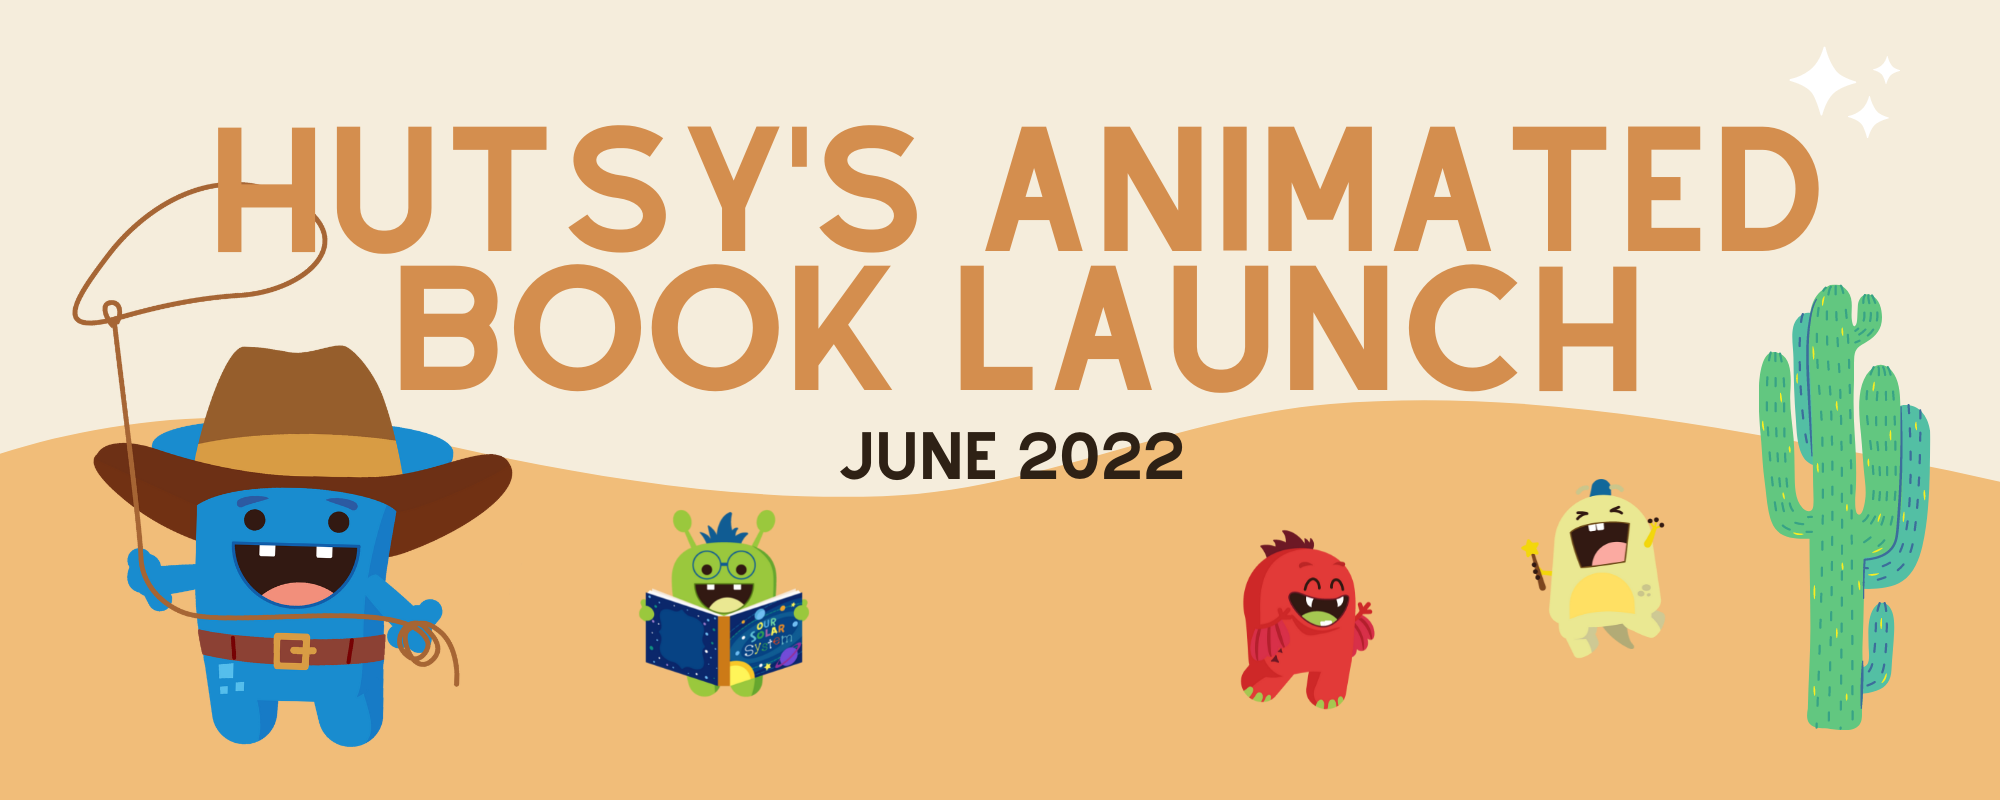 Hutsy’s Animated Book Launch